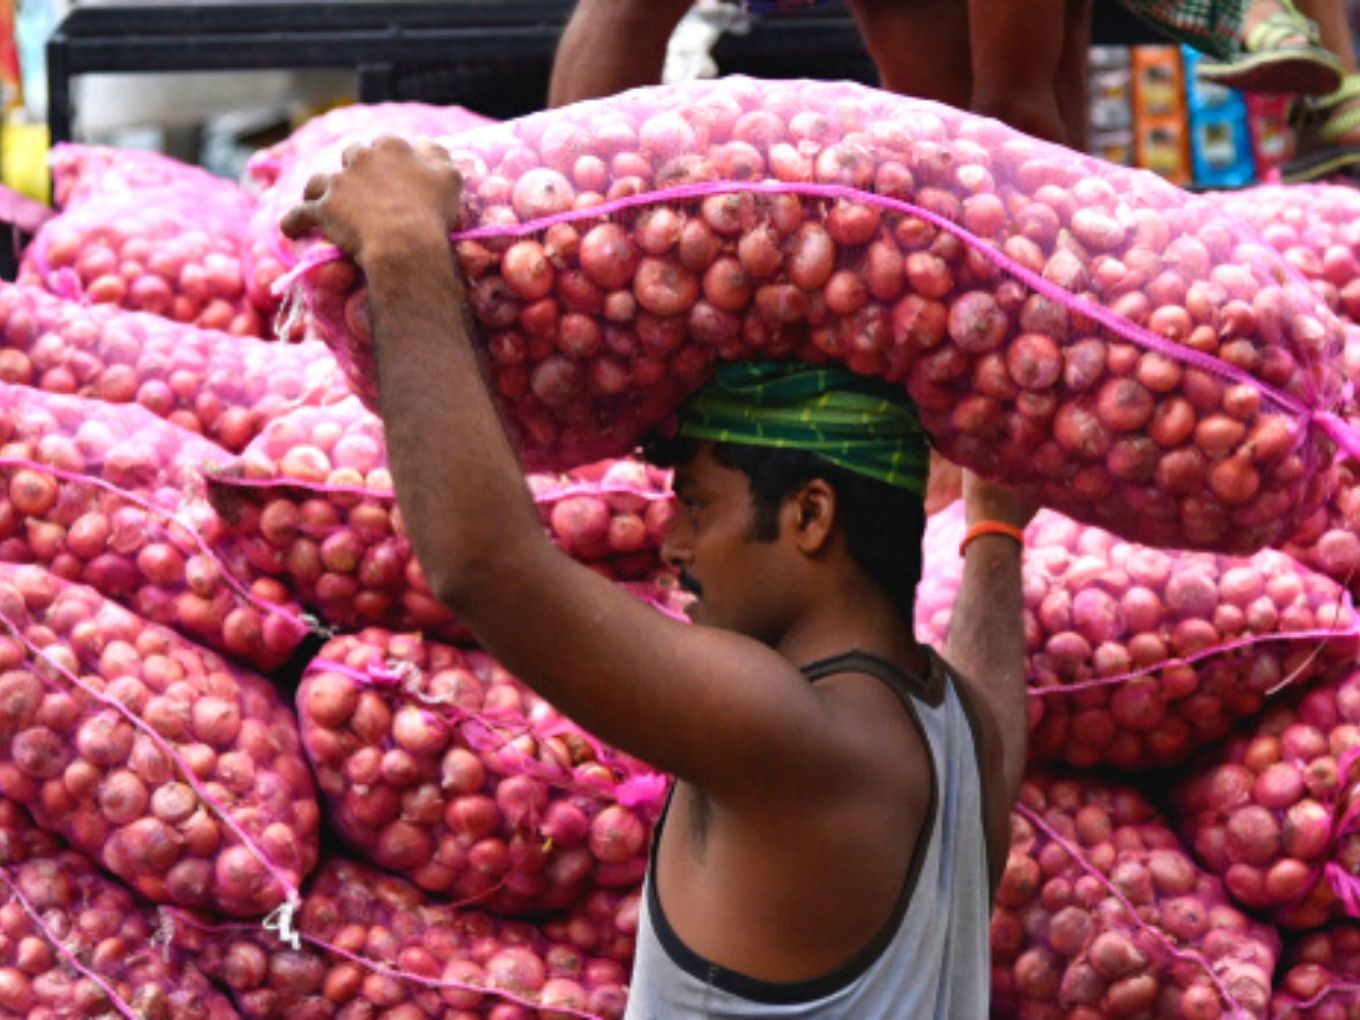 India’s New Agri Policy Looks To Push Supply Chain Tech Adoption